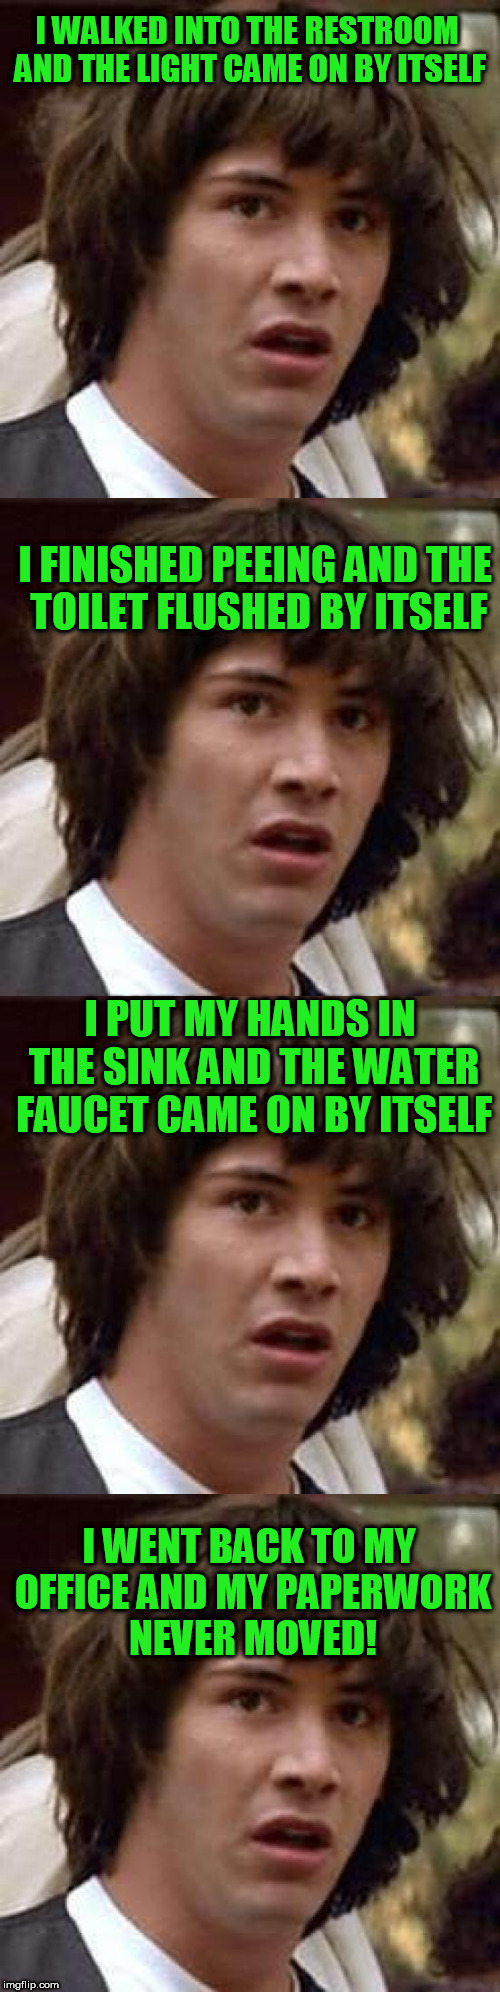 What a day! | I WALKED INTO THE RESTROOM AND THE LIGHT CAME ON BY ITSELF; I FINISHED PEEING AND THE TOILET FLUSHED BY ITSELF; I PUT MY HANDS IN THE SINK AND THE WATER FAUCET CAME ON BY ITSELF; I WENT BACK TO MY OFFICE AND MY PAPERWORK NEVER MOVED! | image tagged in work sucks | made w/ Imgflip meme maker